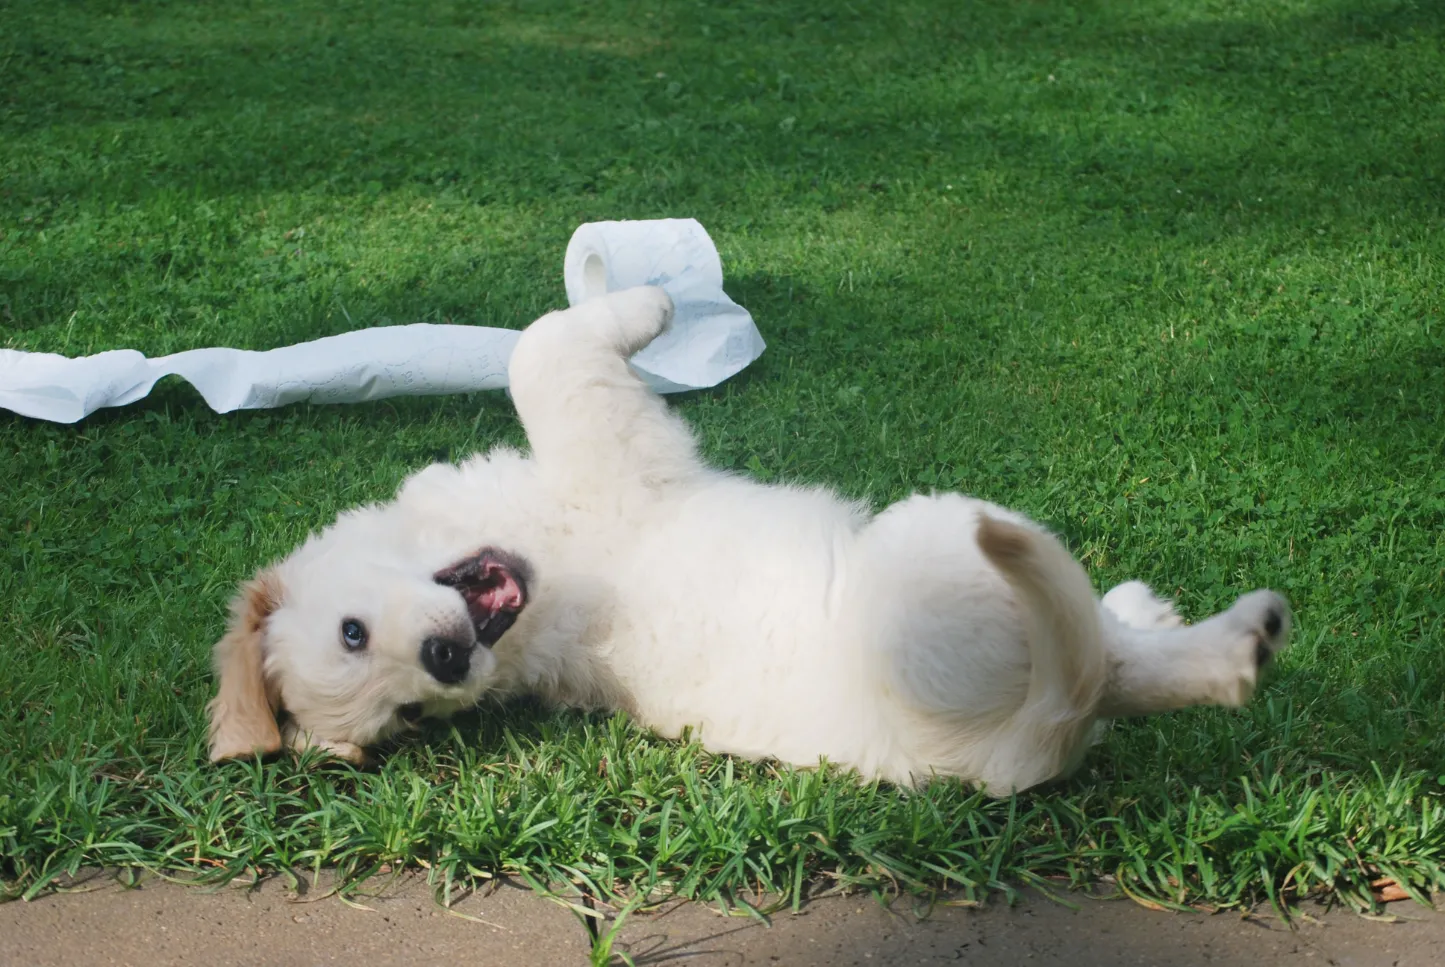 Pet-friendly carpet cleaning: Safe and eco-friendly cleaning solutions for carpets.